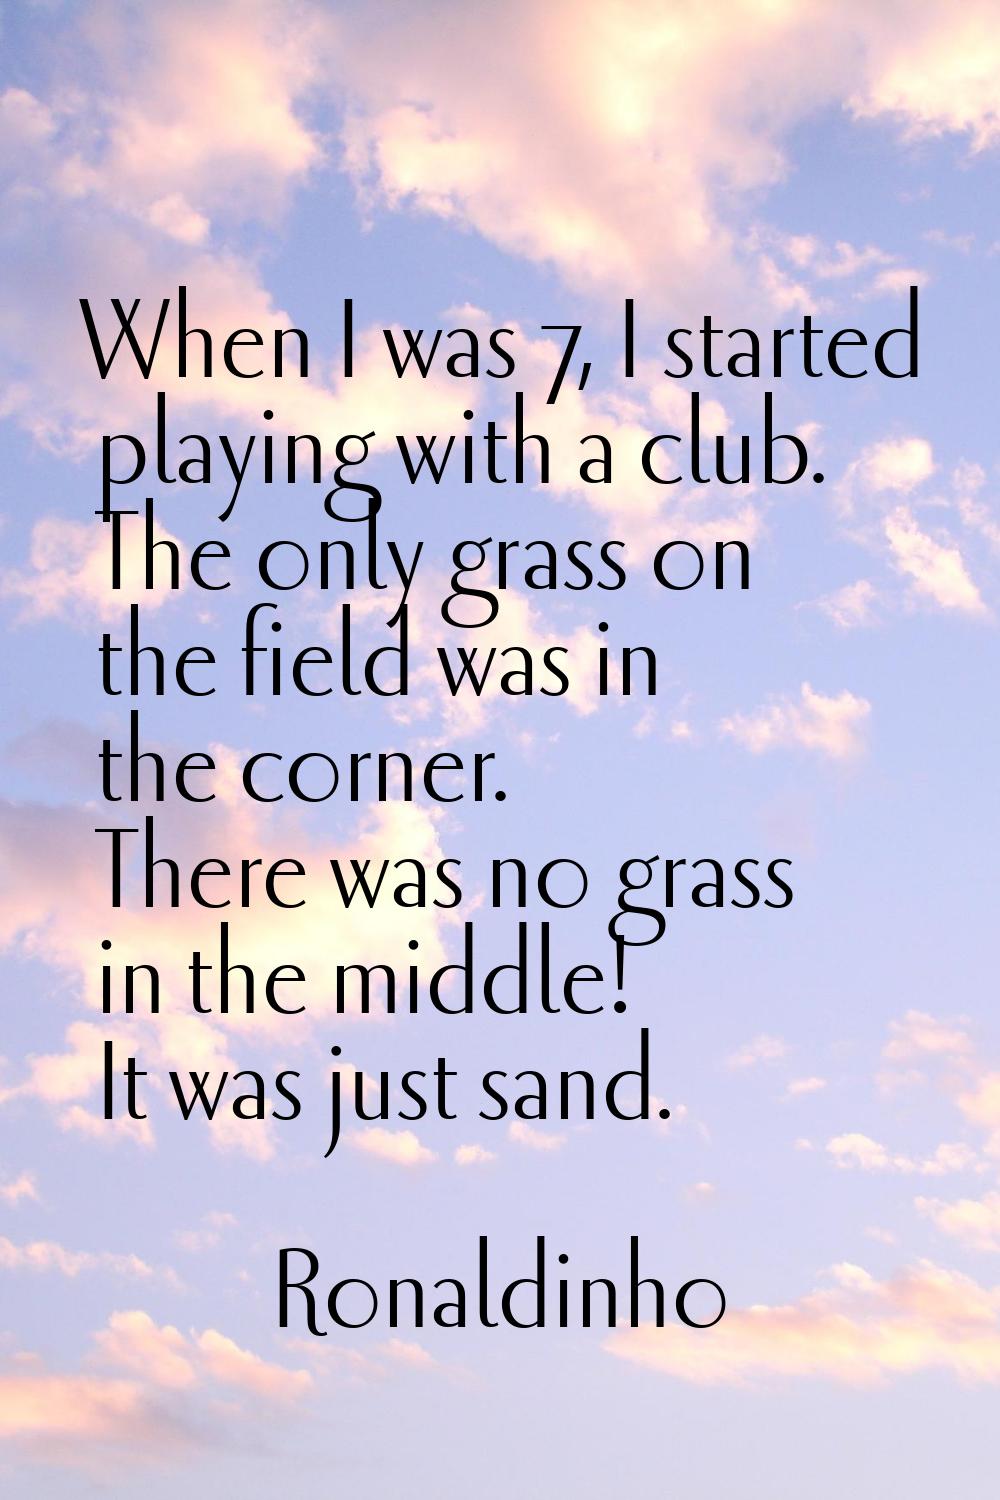 When I was 7, I started playing with a club. The only grass on the field was in the corner. There w